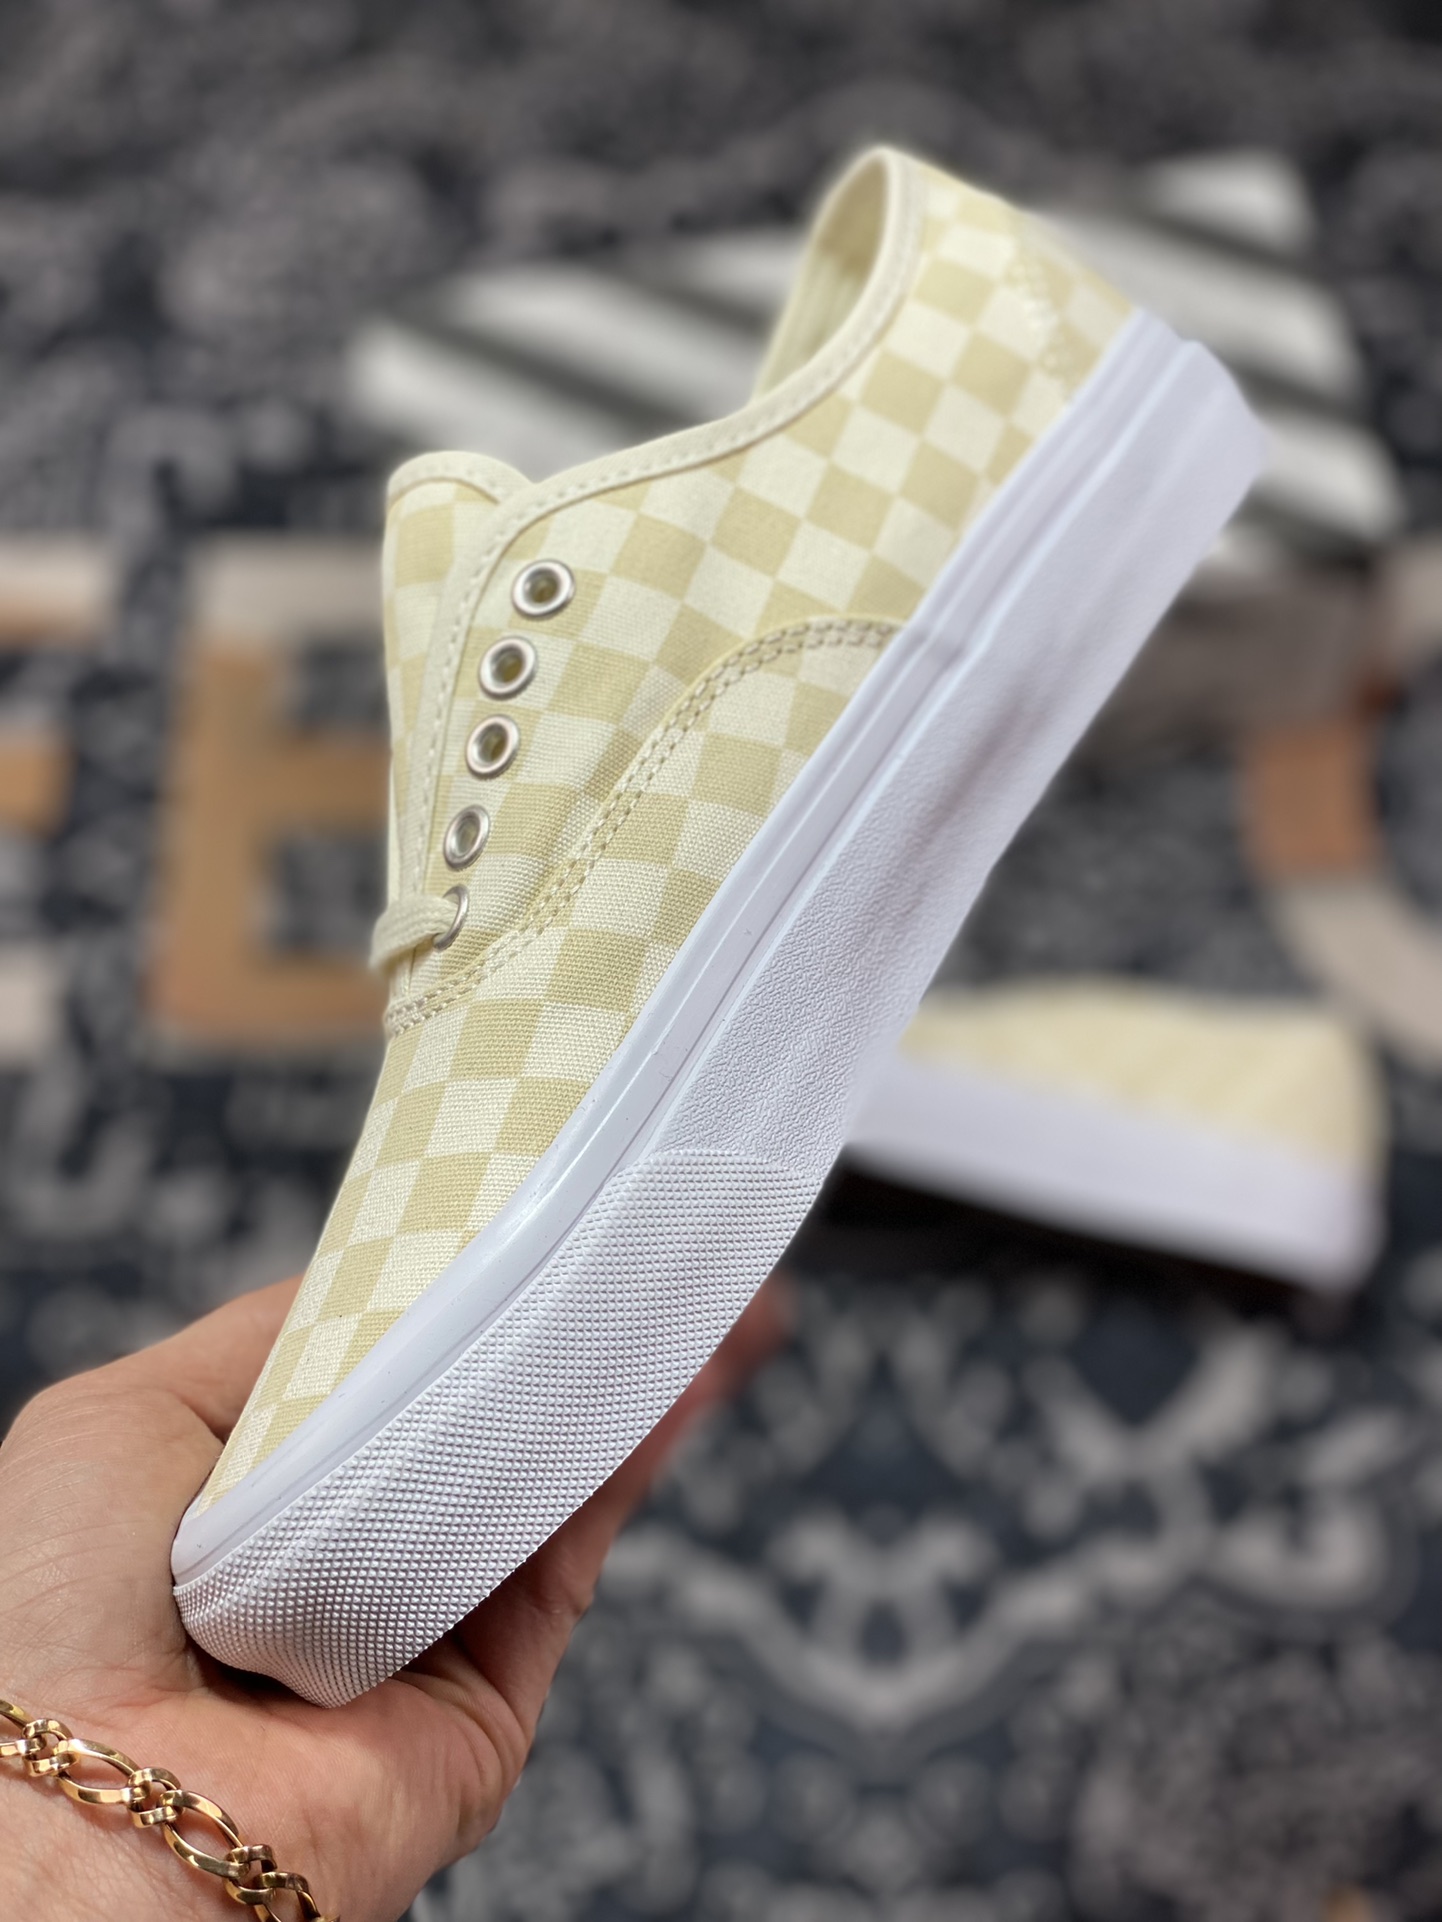 Vans Vault OG Authentic yellow and white checkerboard retro casual canvas shoes